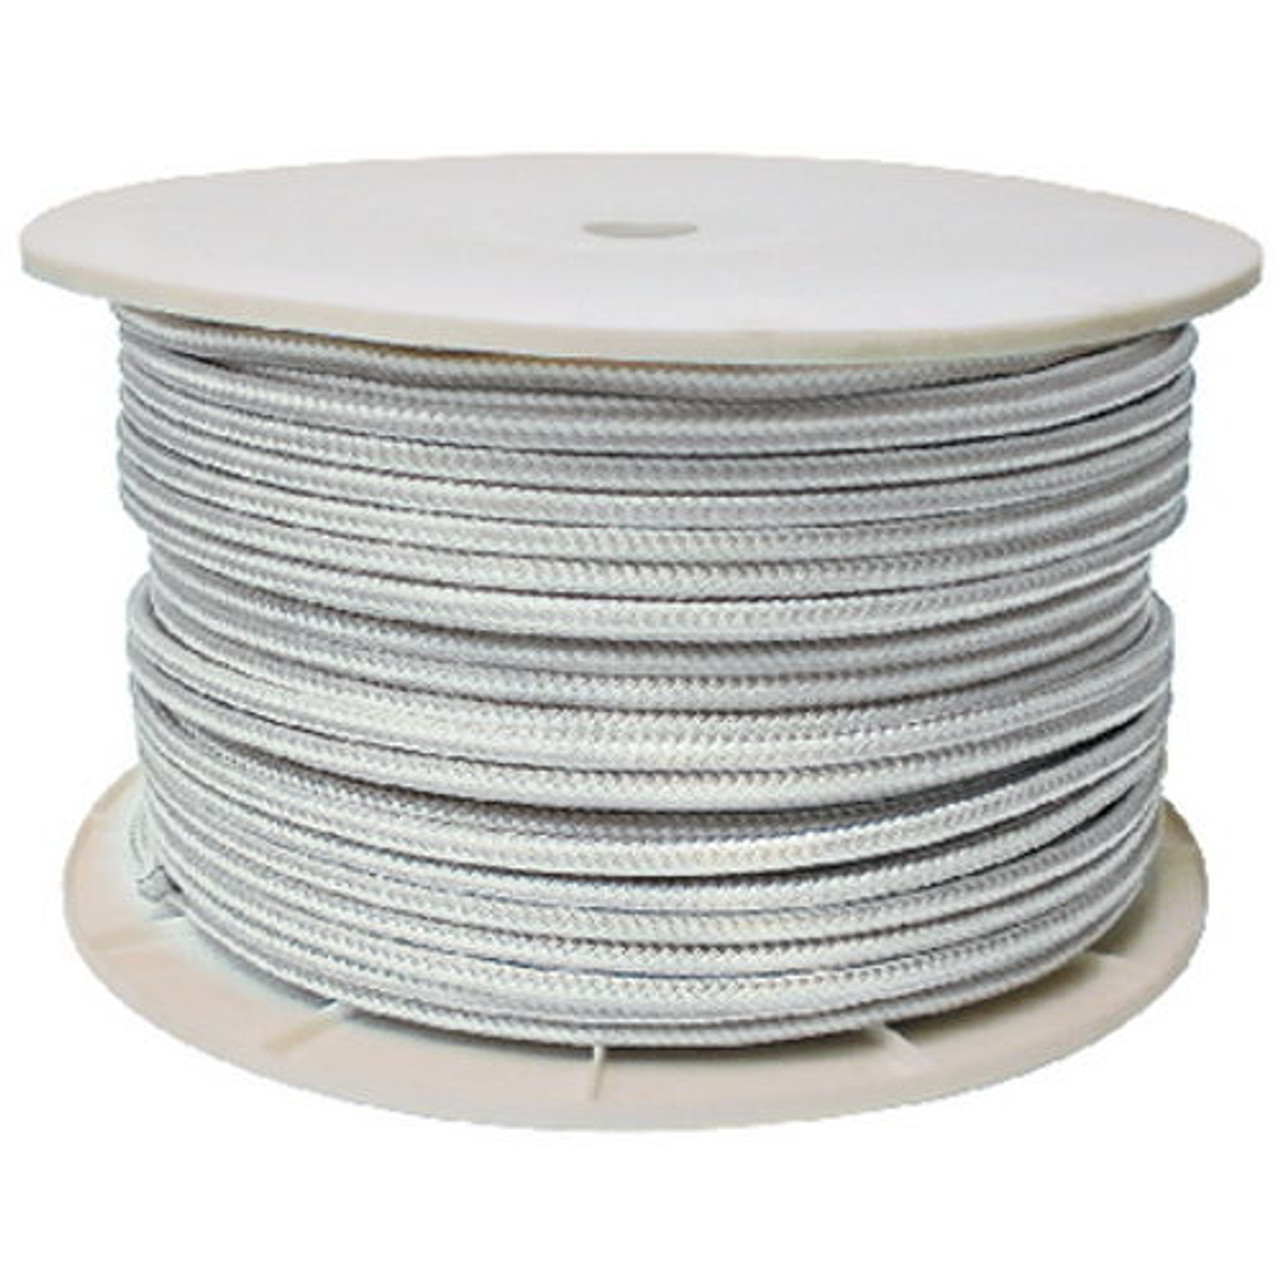 3/4 Inch x 600 Ft White Double Braid Nylon Rope Spool for Boats